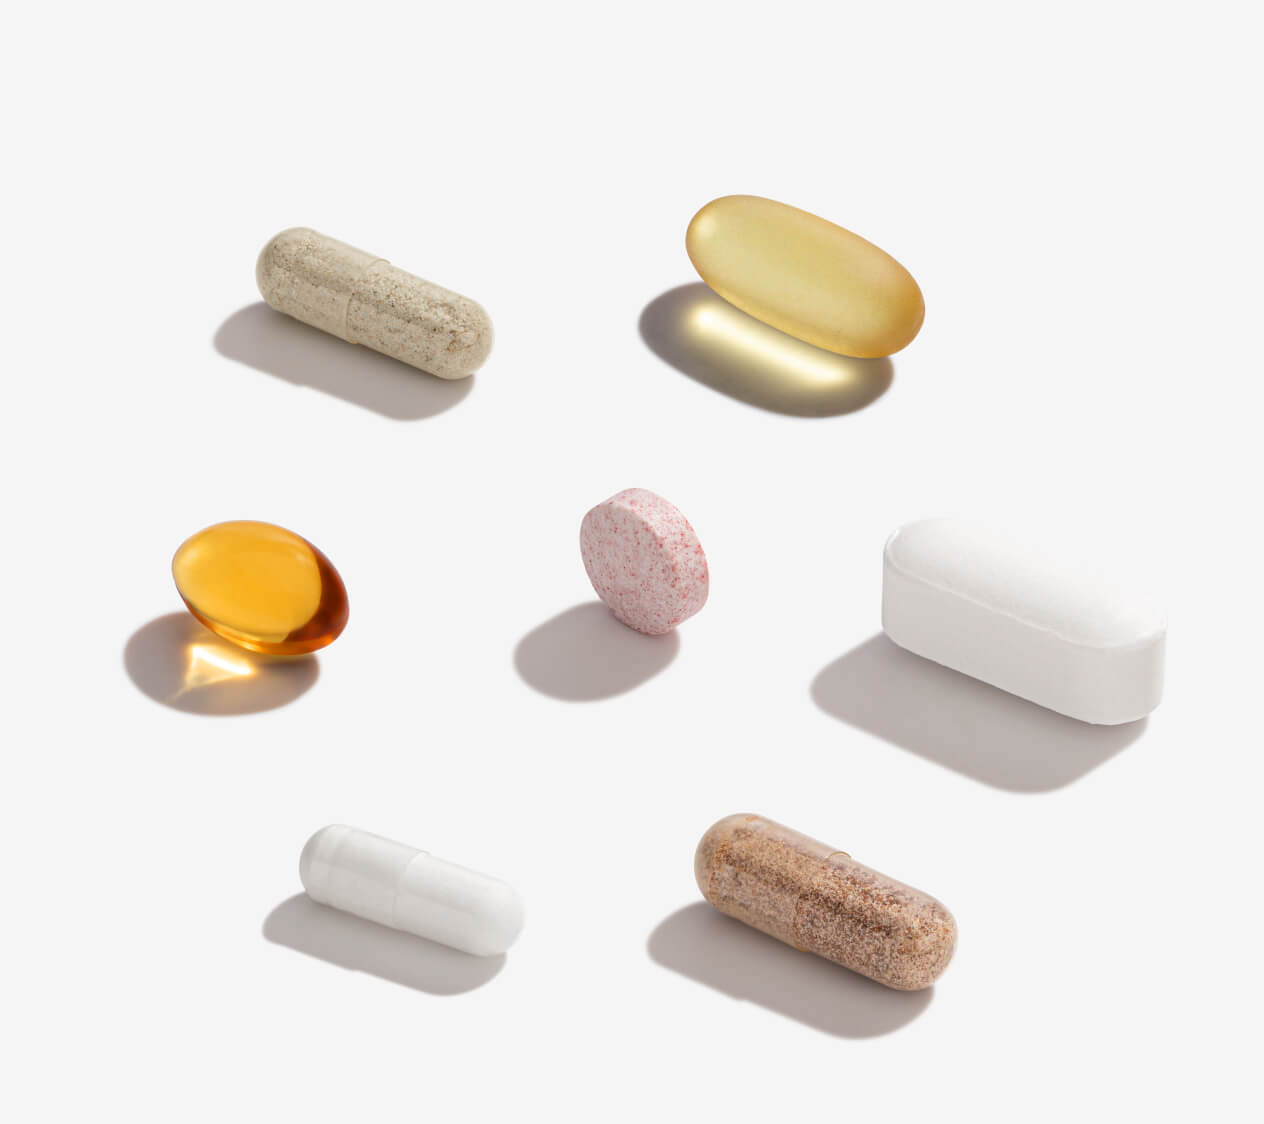 7 supplements lined up on a light background 